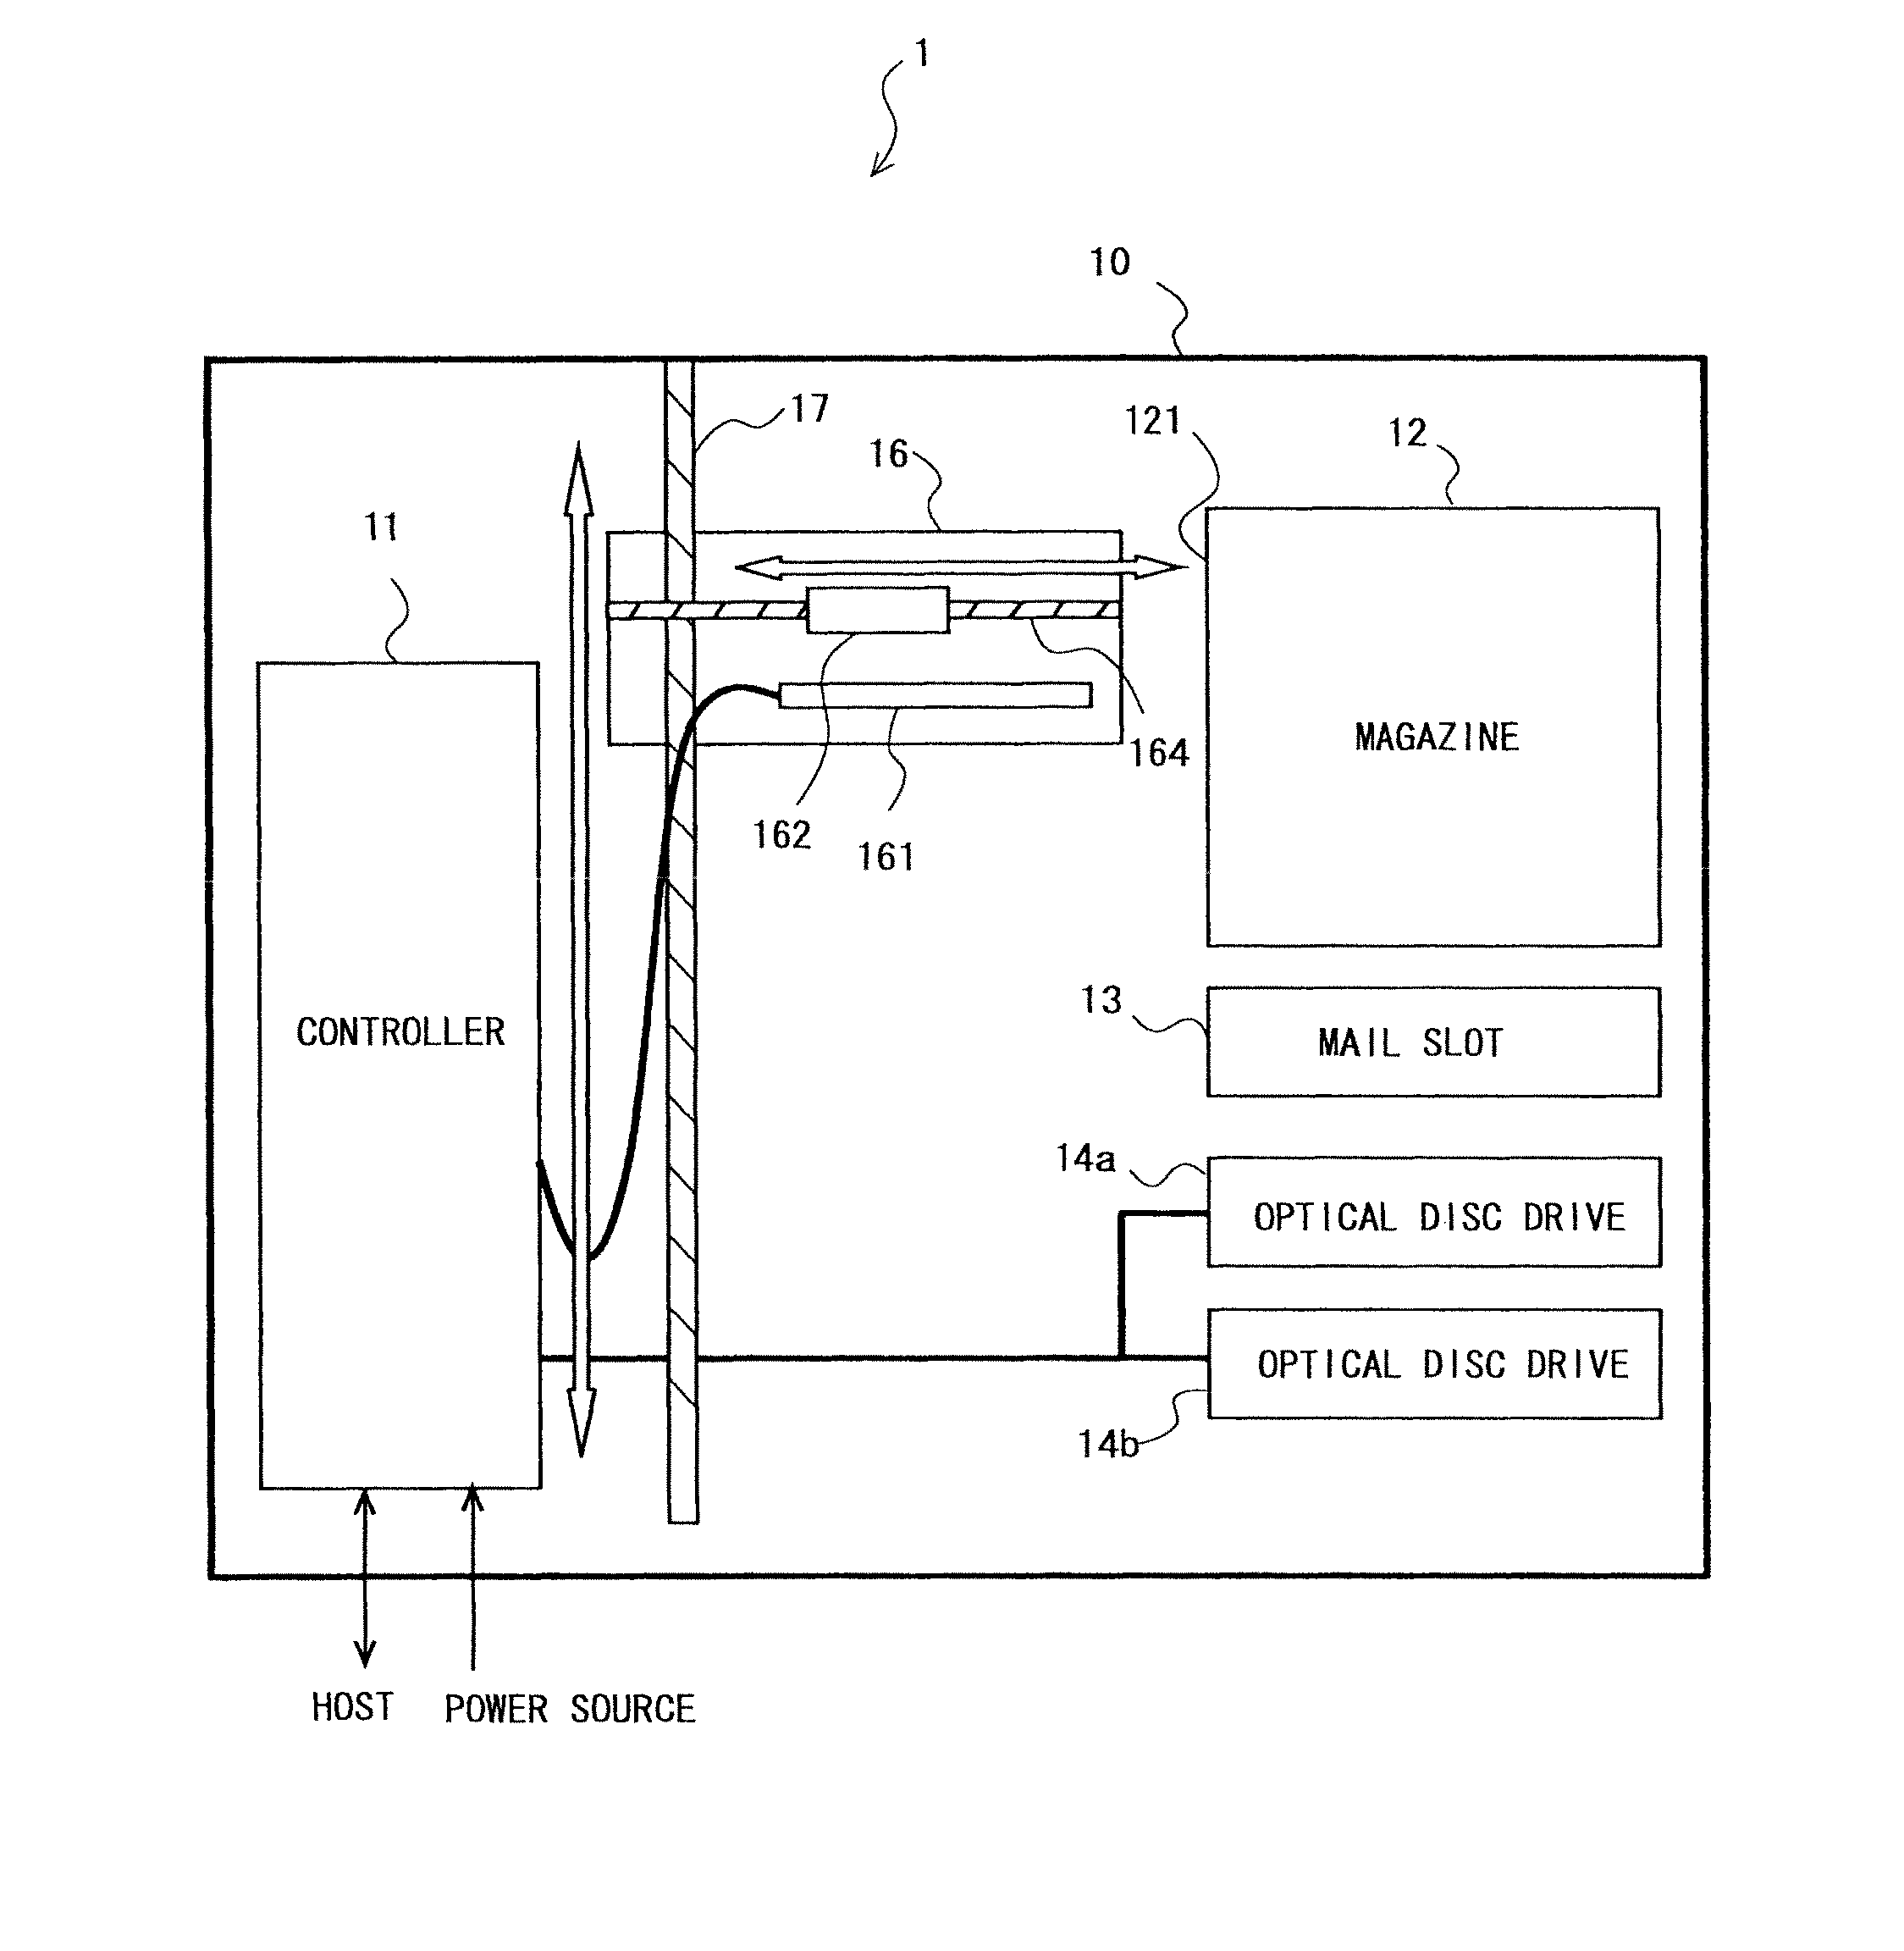 Disk library apparatus